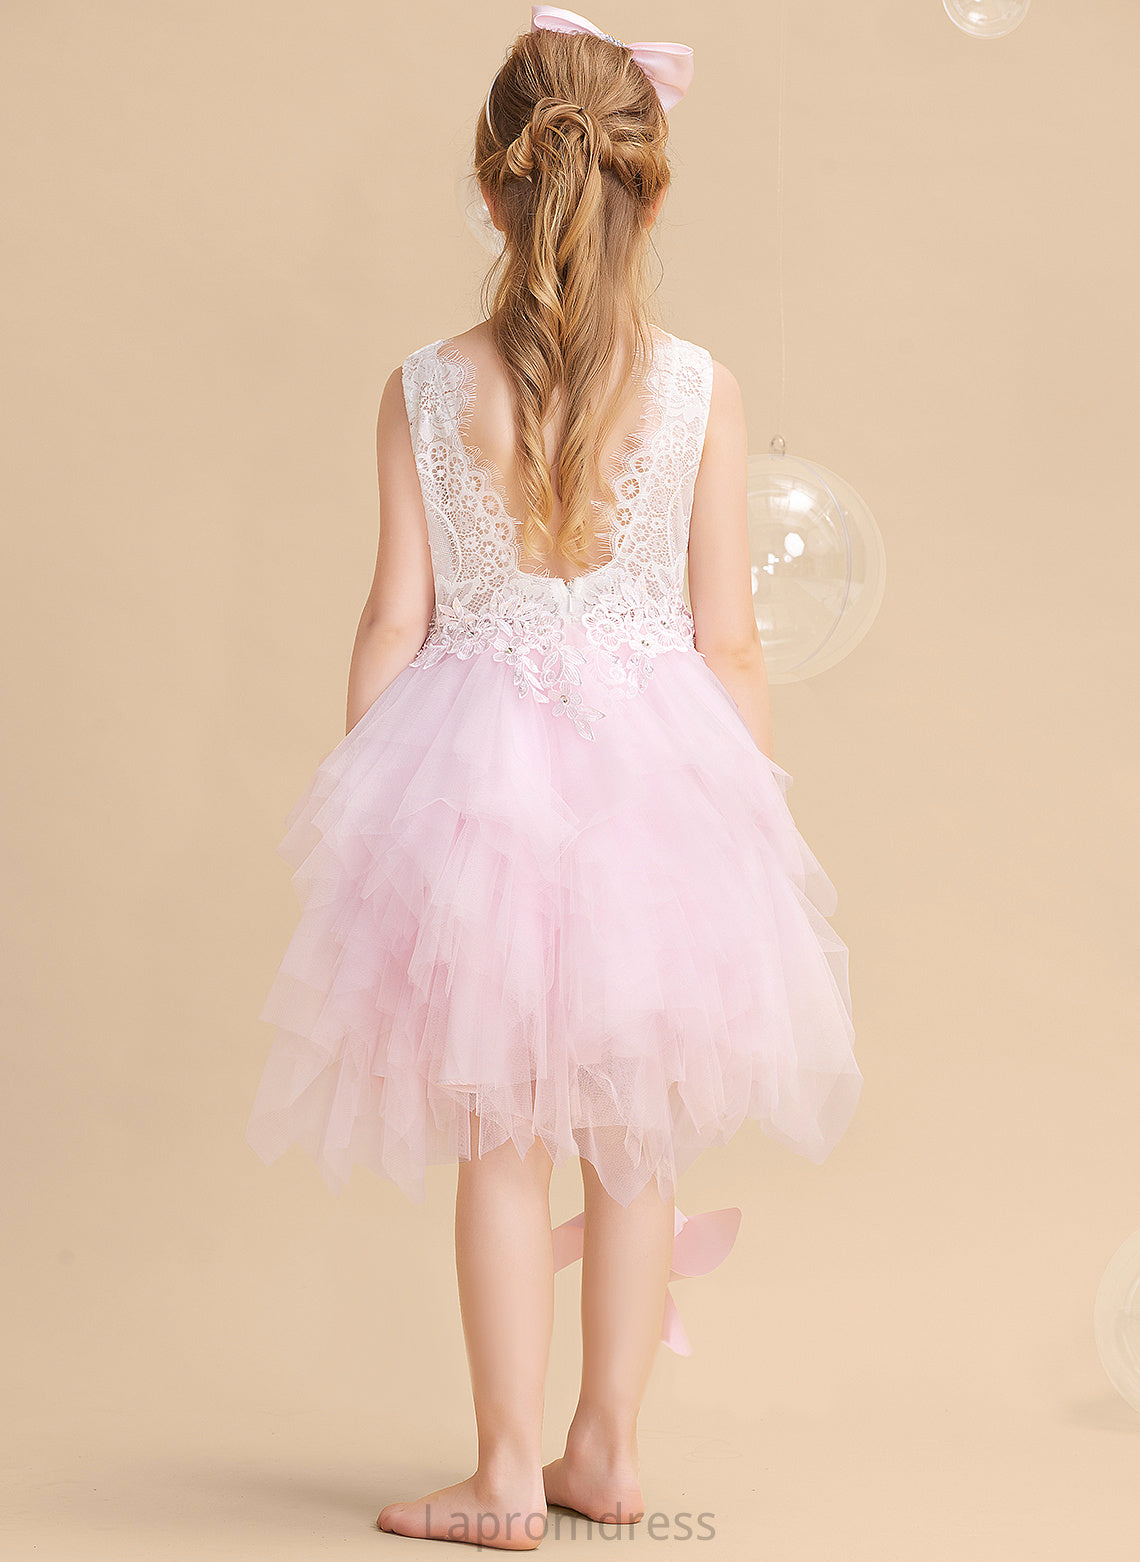 Back Flower Tulle/Lace Lace/Beading/Sequins/V - Sleeveless Scoop Dress Neck Nicola Ball-Gown/Princess Knee-length With Girl Flower Girl Dresses